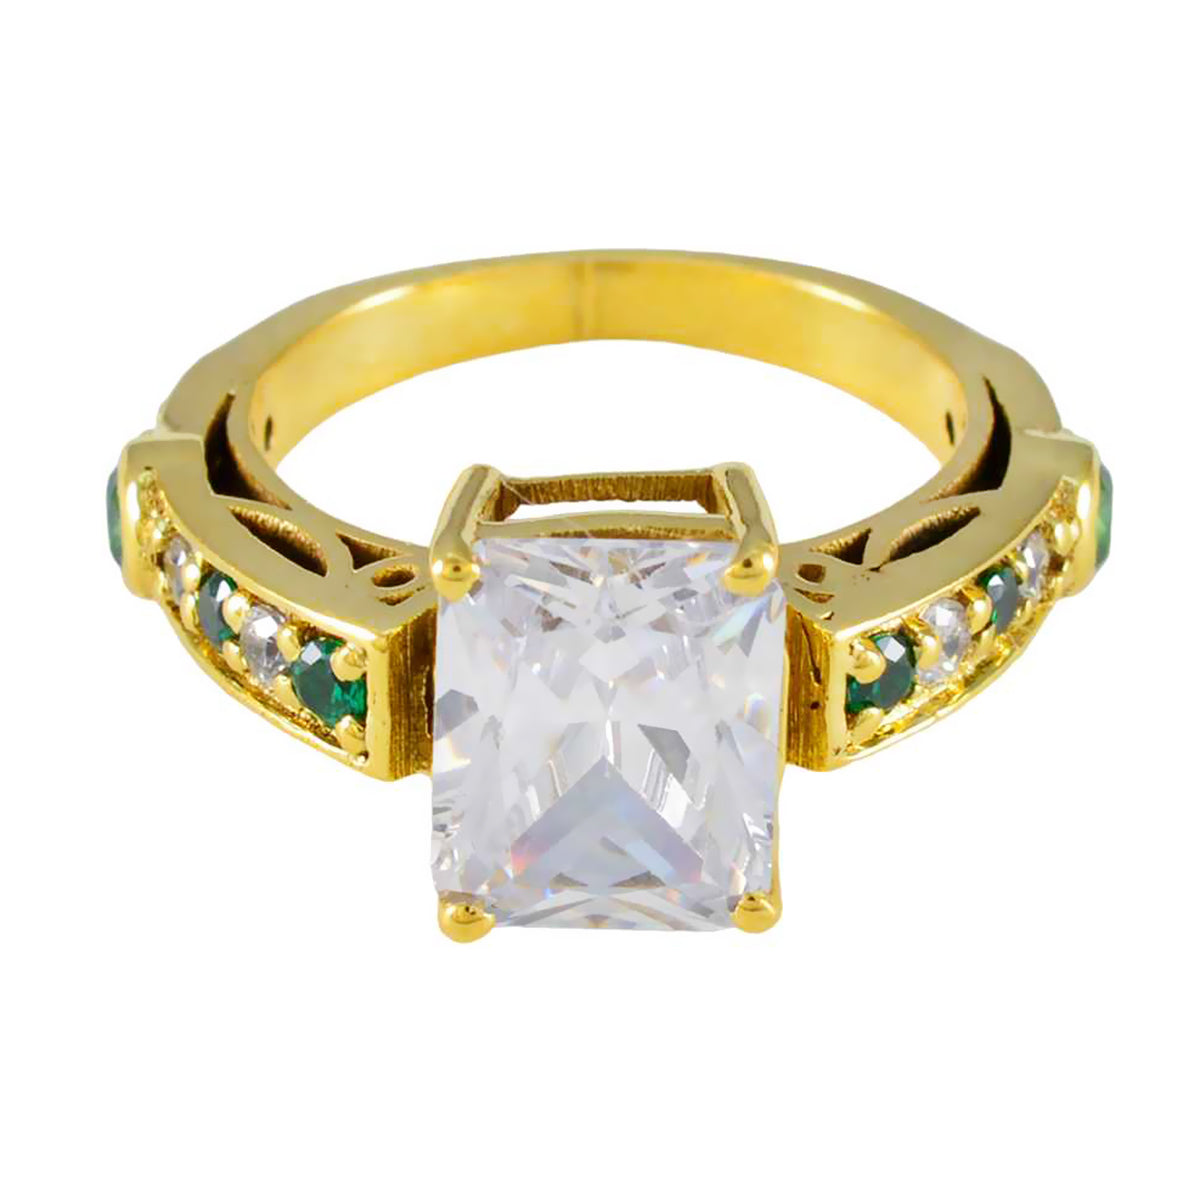 Riyo Gorgeous Silver Ring With Yellow Gold Plating Emerald CZ Stone Octagon Shape Prong Setting Custom Jewelry Christmas Ring